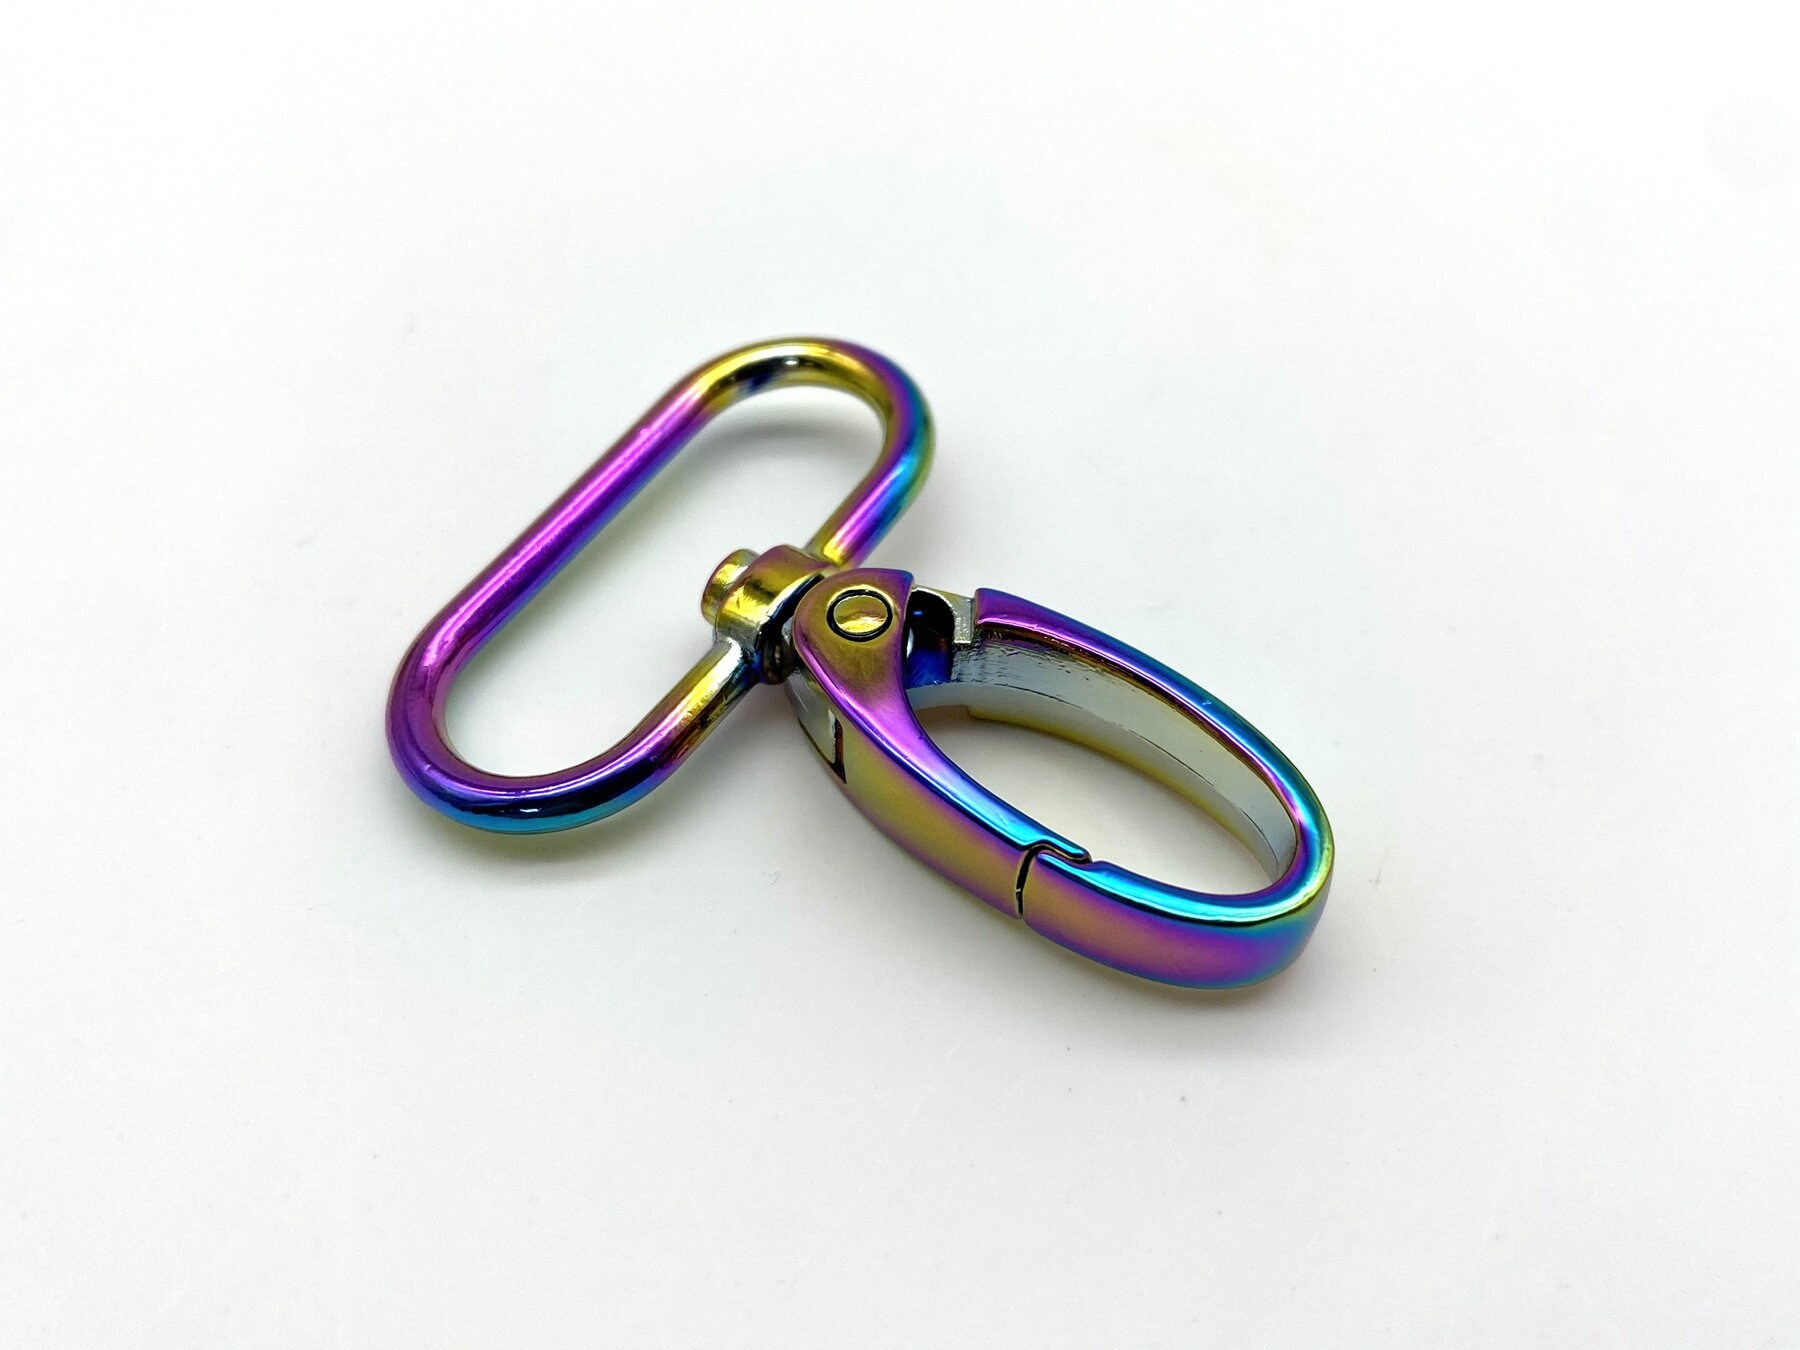 1.5 Inch 38mm Bag Purse Nickel Swivel Snap Clasp Clip Hooks for Handbag  Purse Strap Handlesbag Clasp Replacement -  Norway